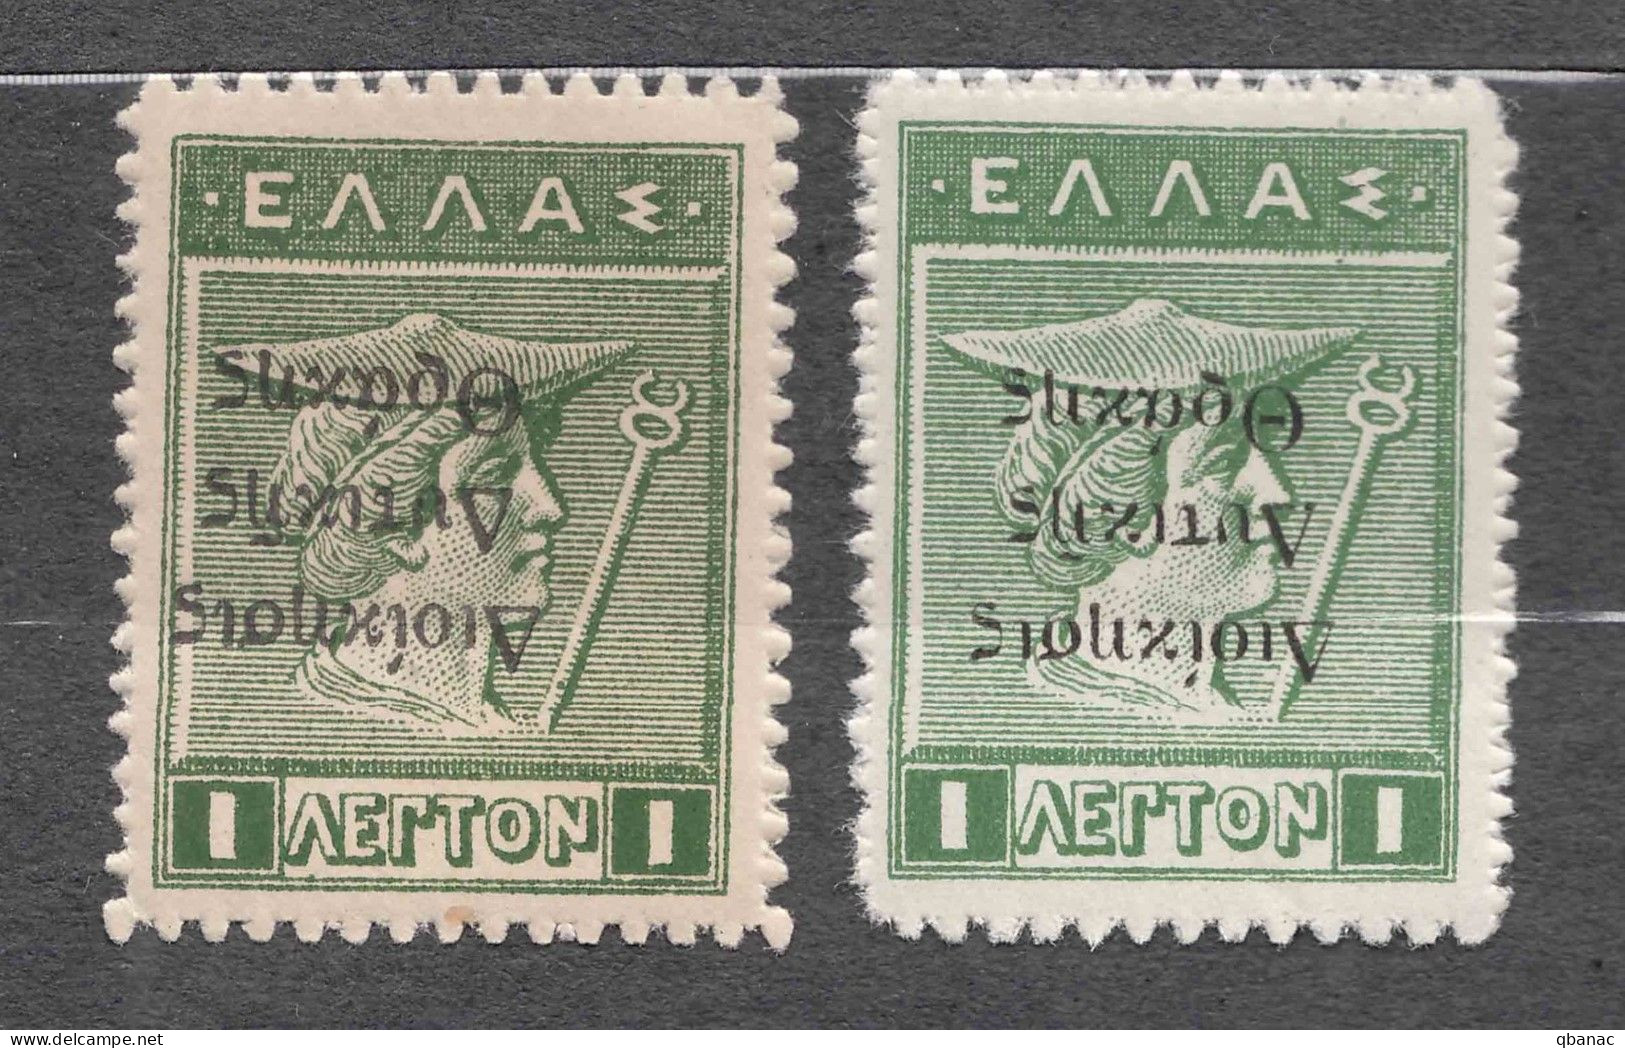 Thrace 1913 Inverted Overprint Stamps In Two Colour Shades Of Green, Mint Never Hinged And Mint Hinged - Thracië